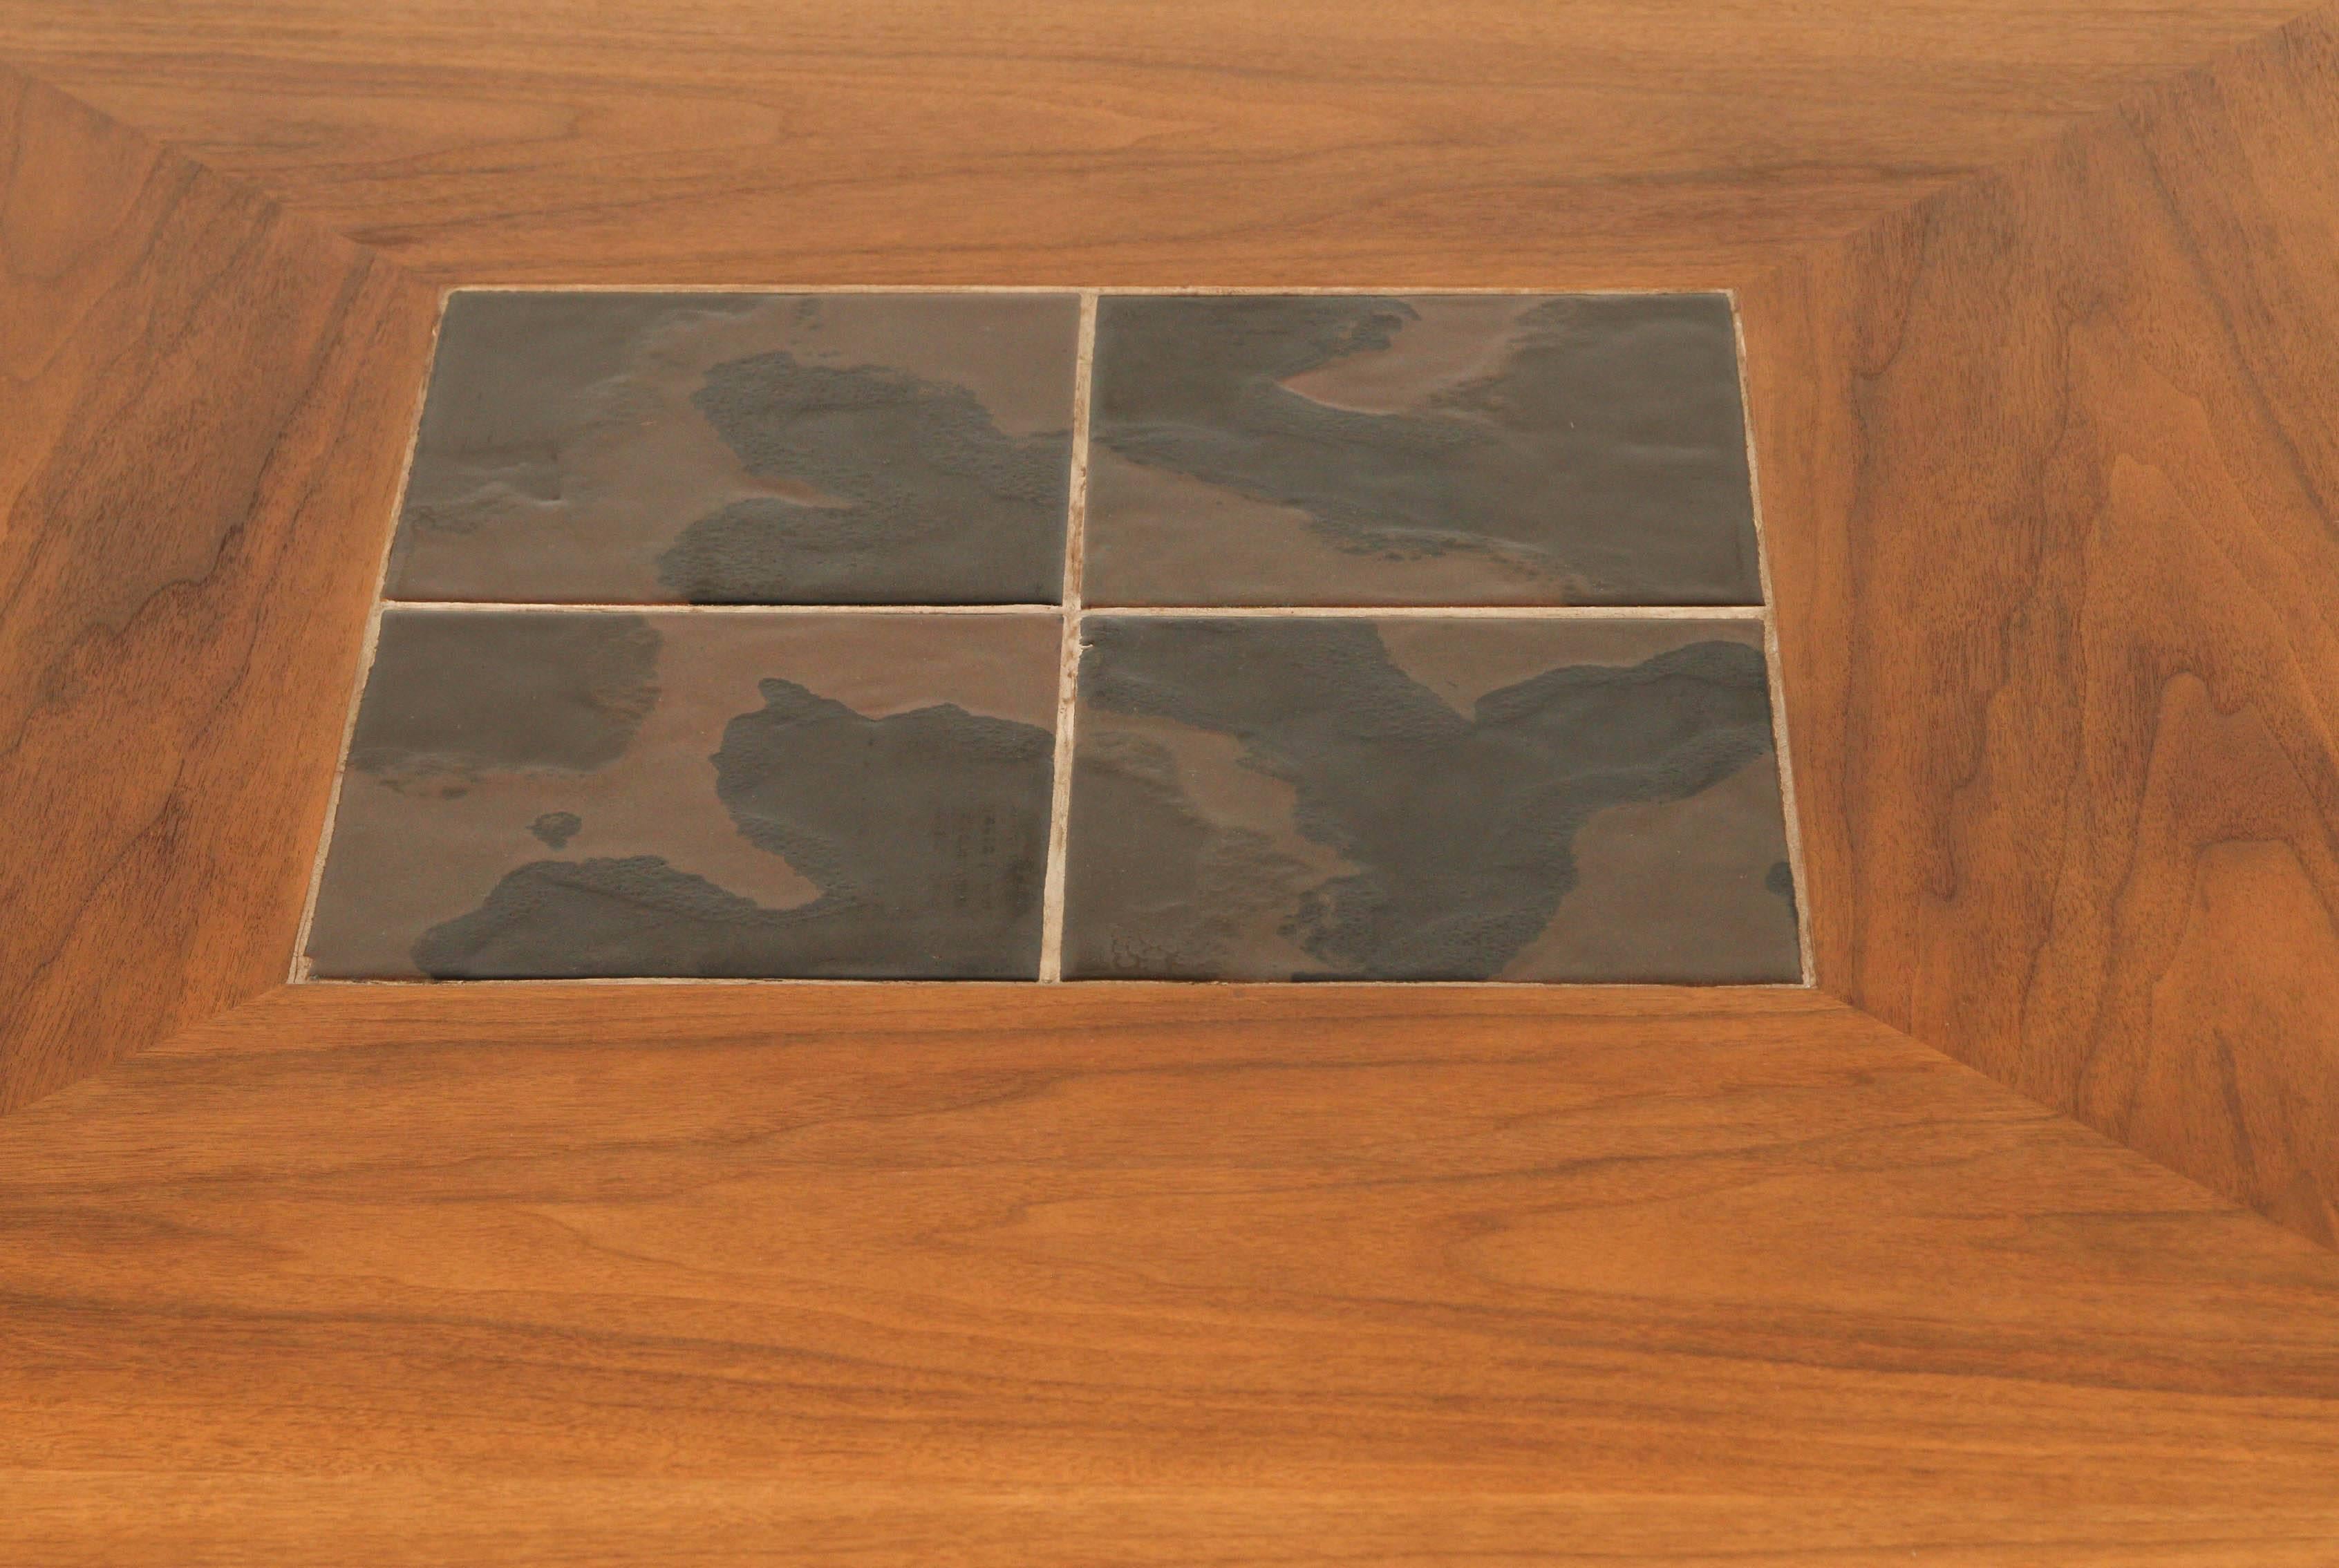 American Tile and Walnut Coffee Table Attributed to Edward Wormley for Dunbar